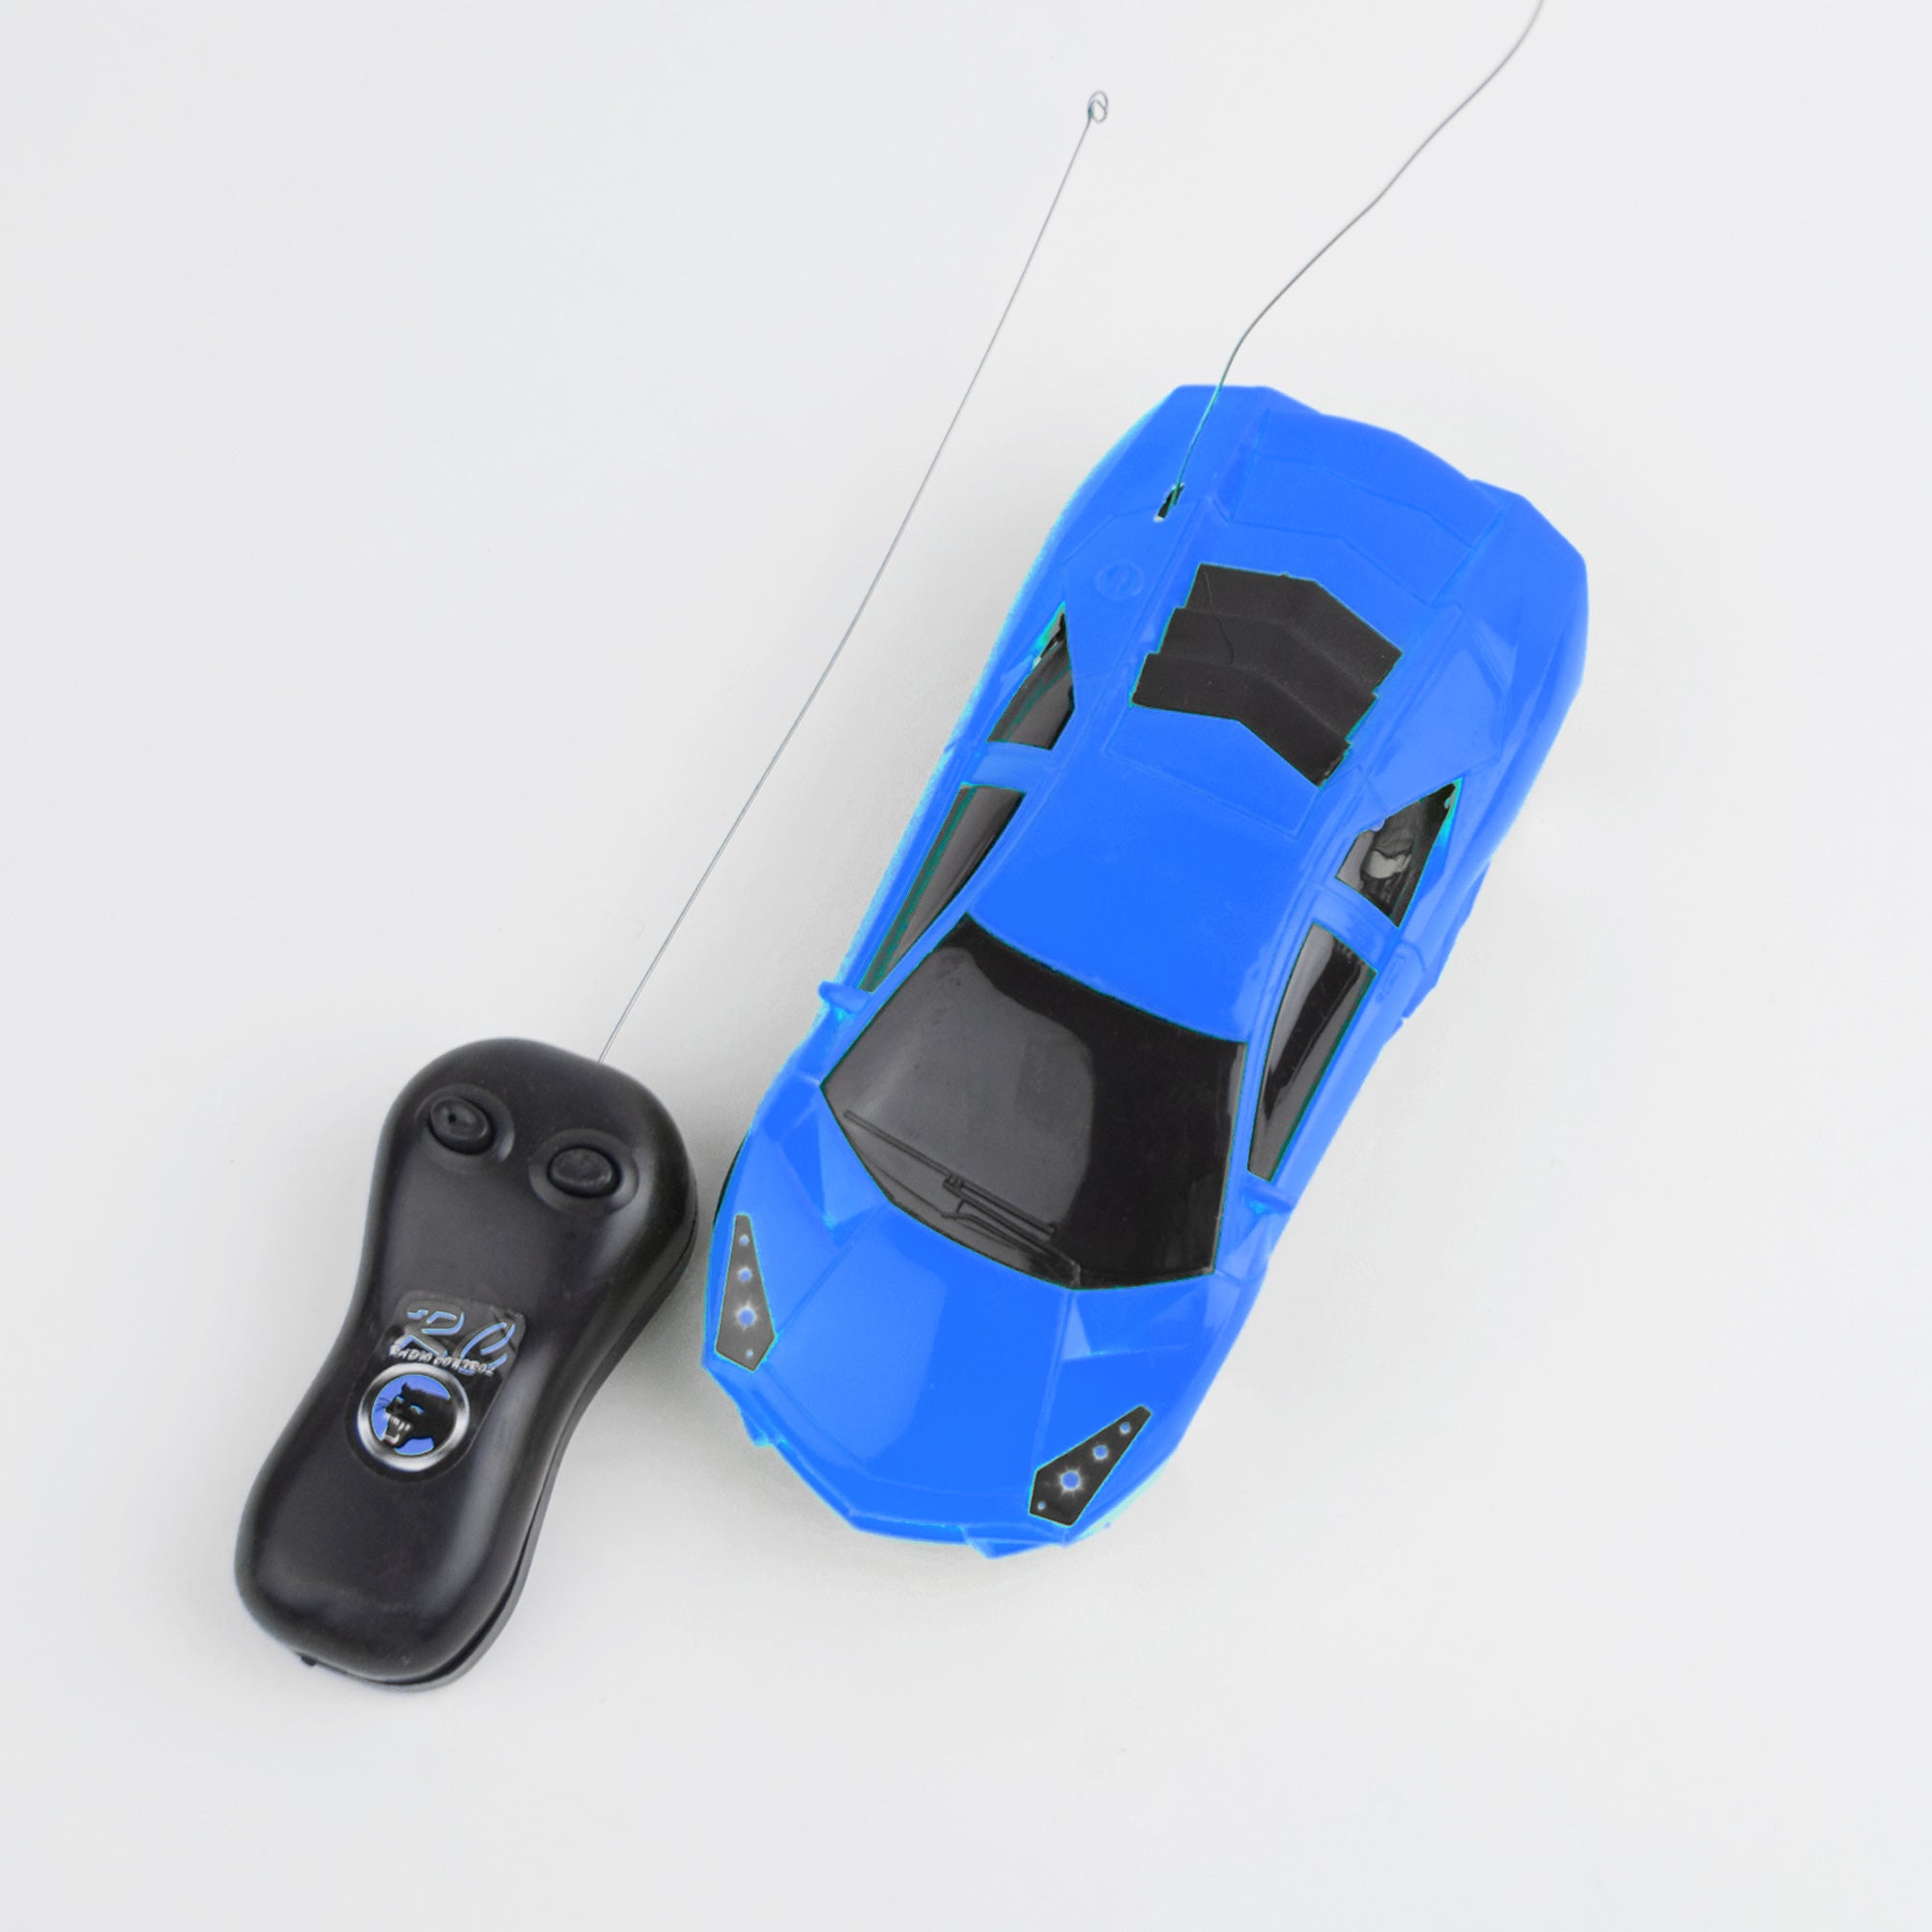 Remote Control Battery Operated Wireless Modern Teams Car